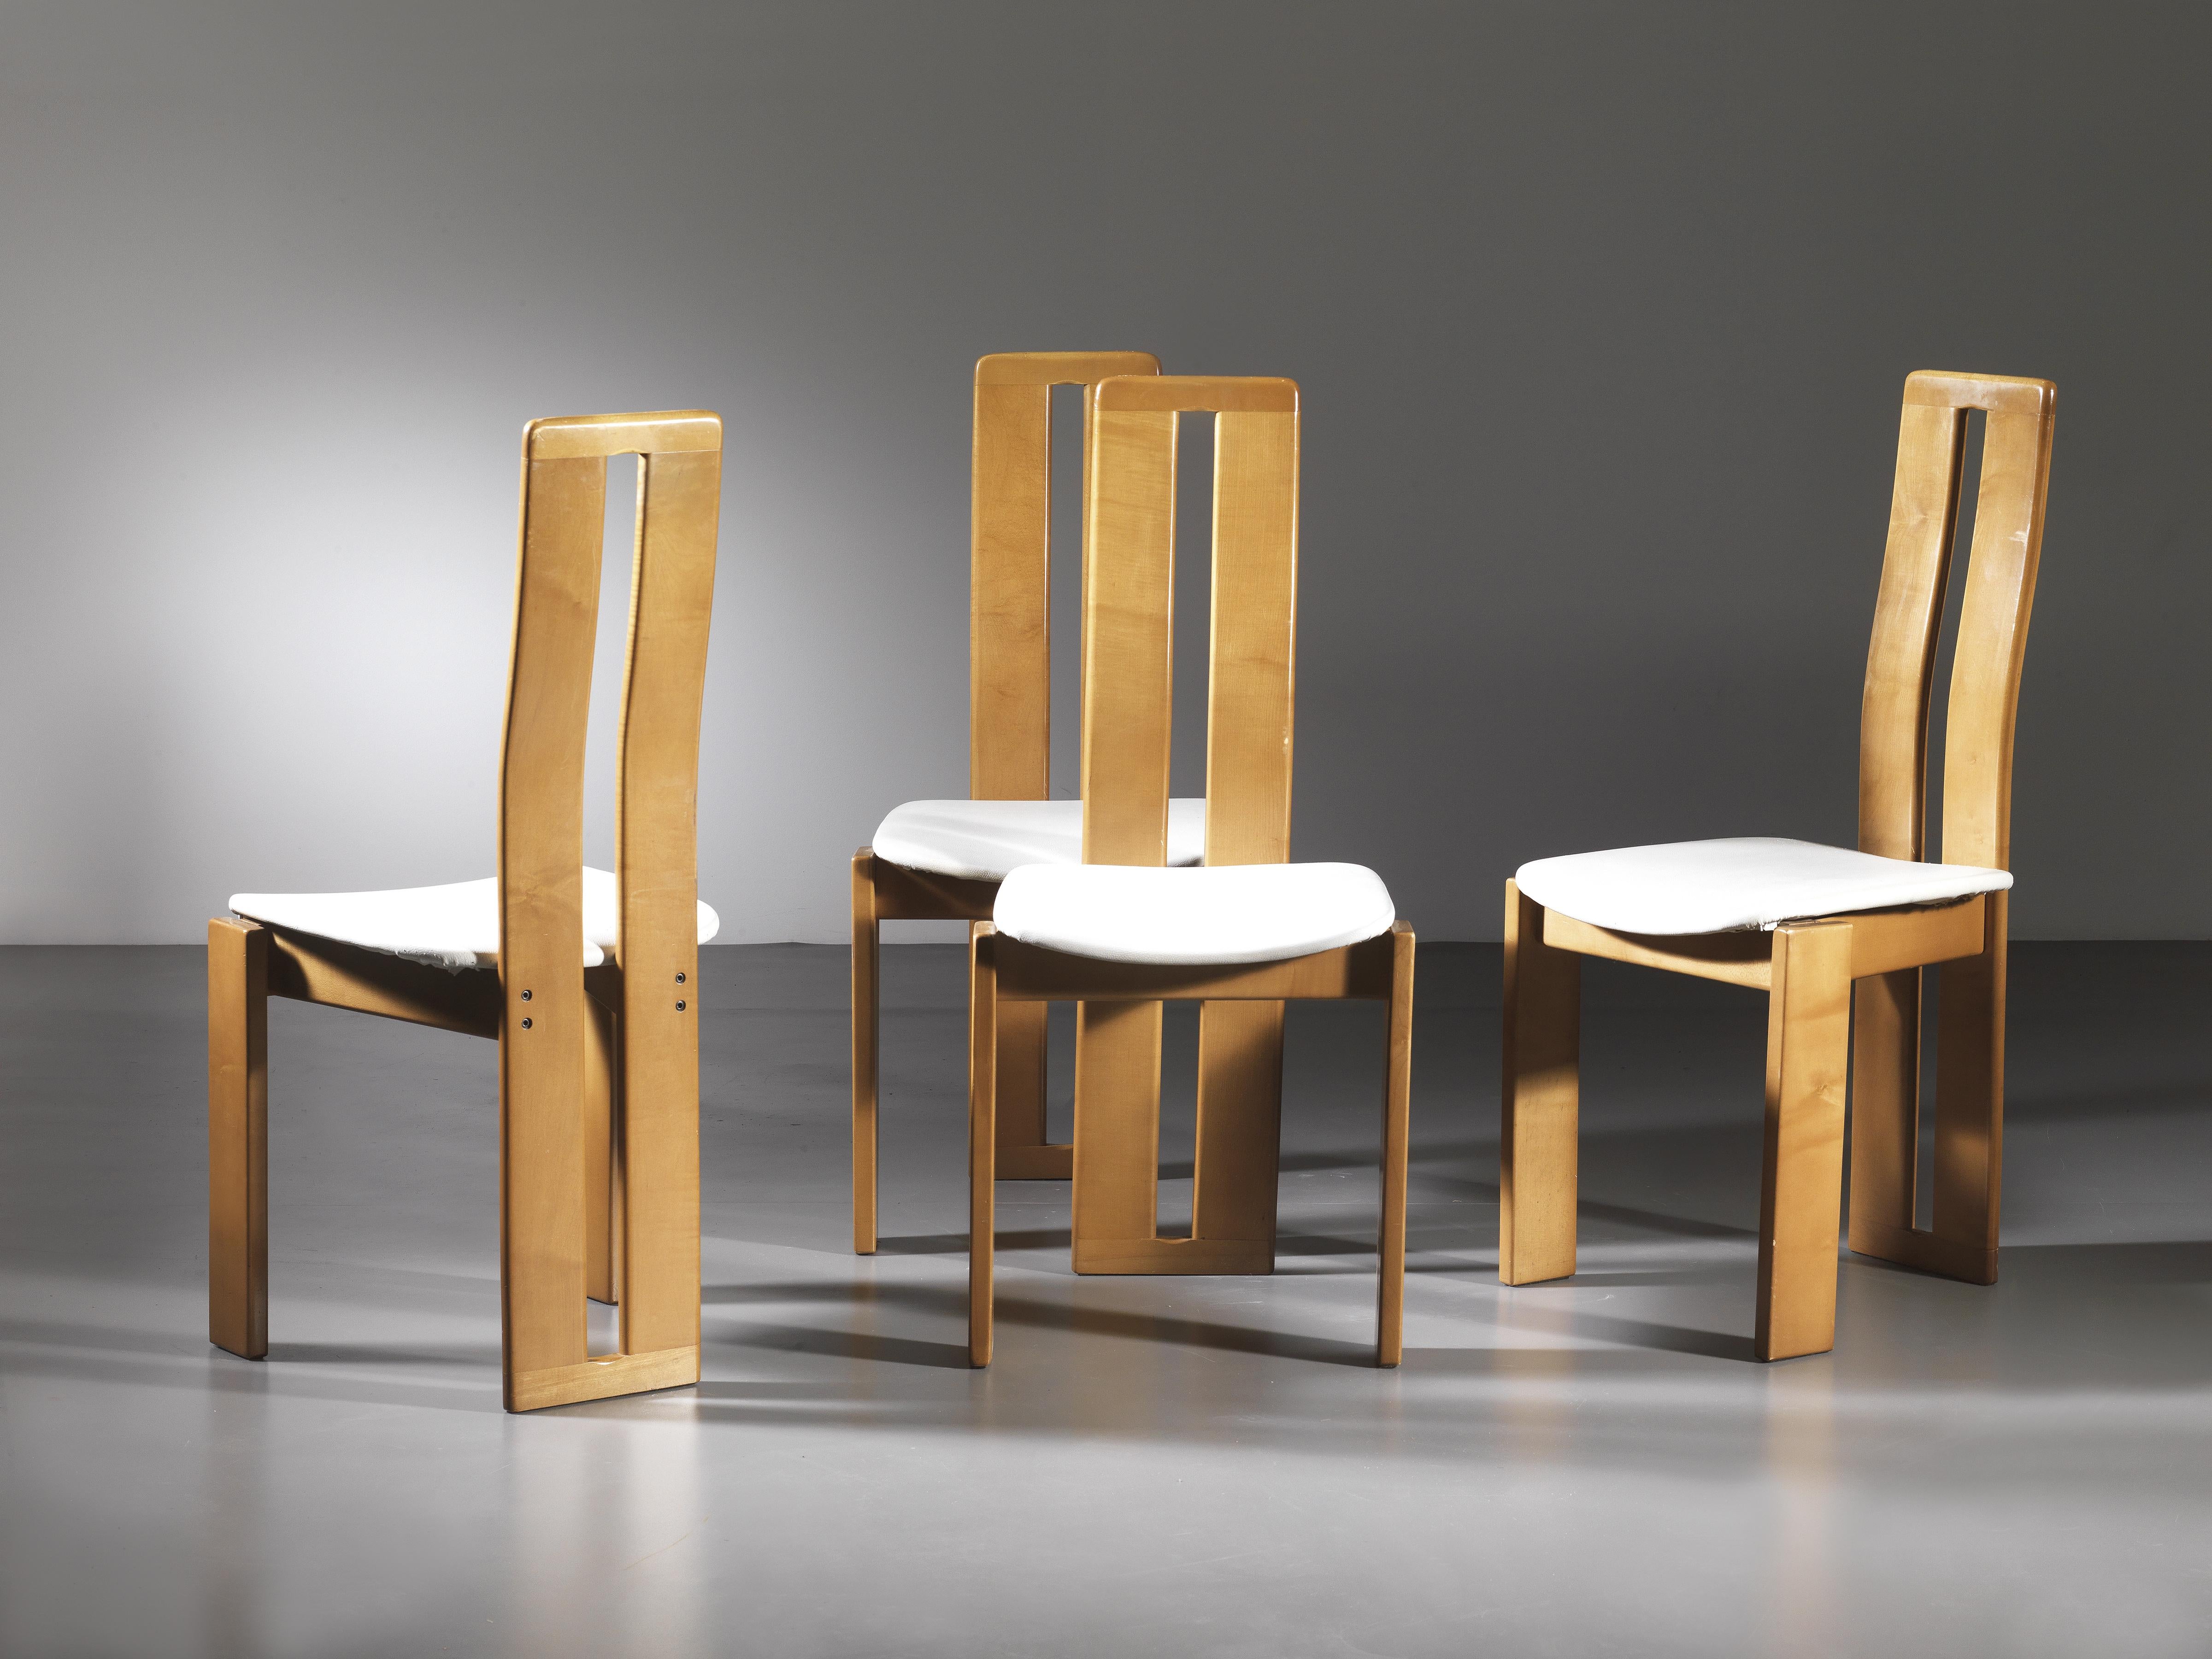 Set of four chairs by Mario Marenco, Mobil Girgi, Italy, 1970s

Four 70s design solid wood chairs, made by the well-known Italian company Mobil Girgi
The chairs have a solid beech wood frame and a padded seat